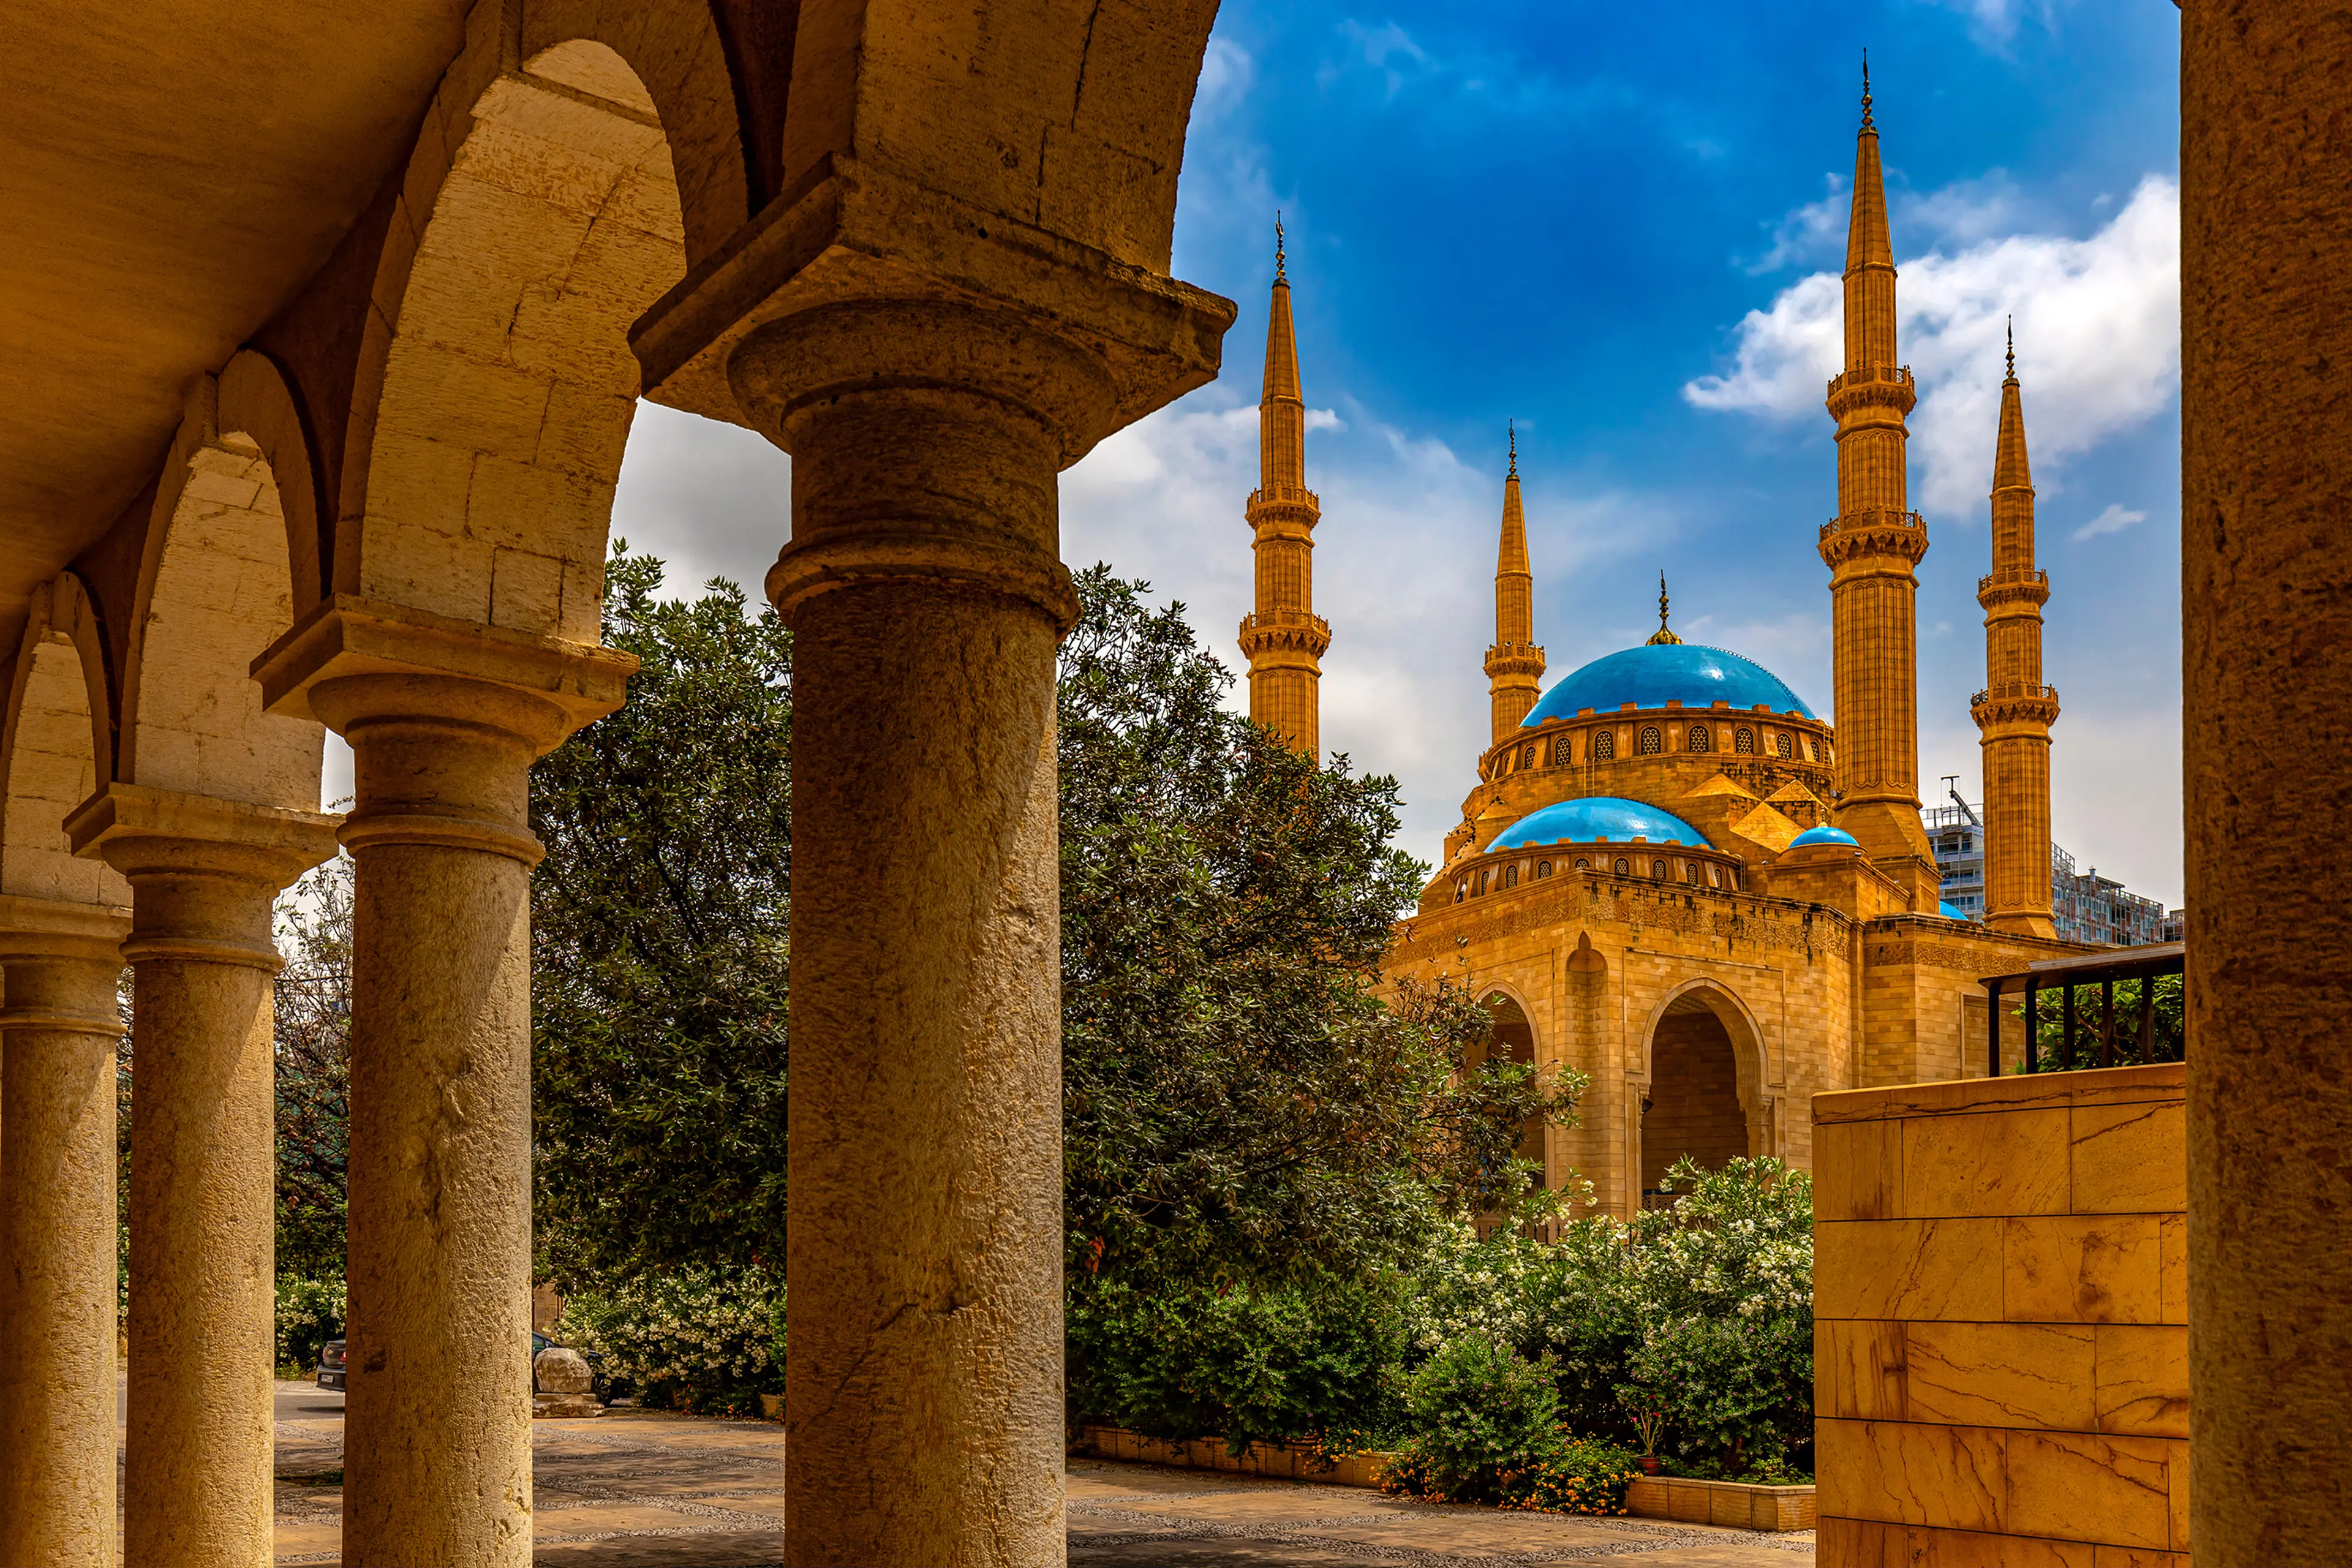 Cloisters of Saint George Greek Orthodox Cathedral and Mohammad Al-Amim Mosque